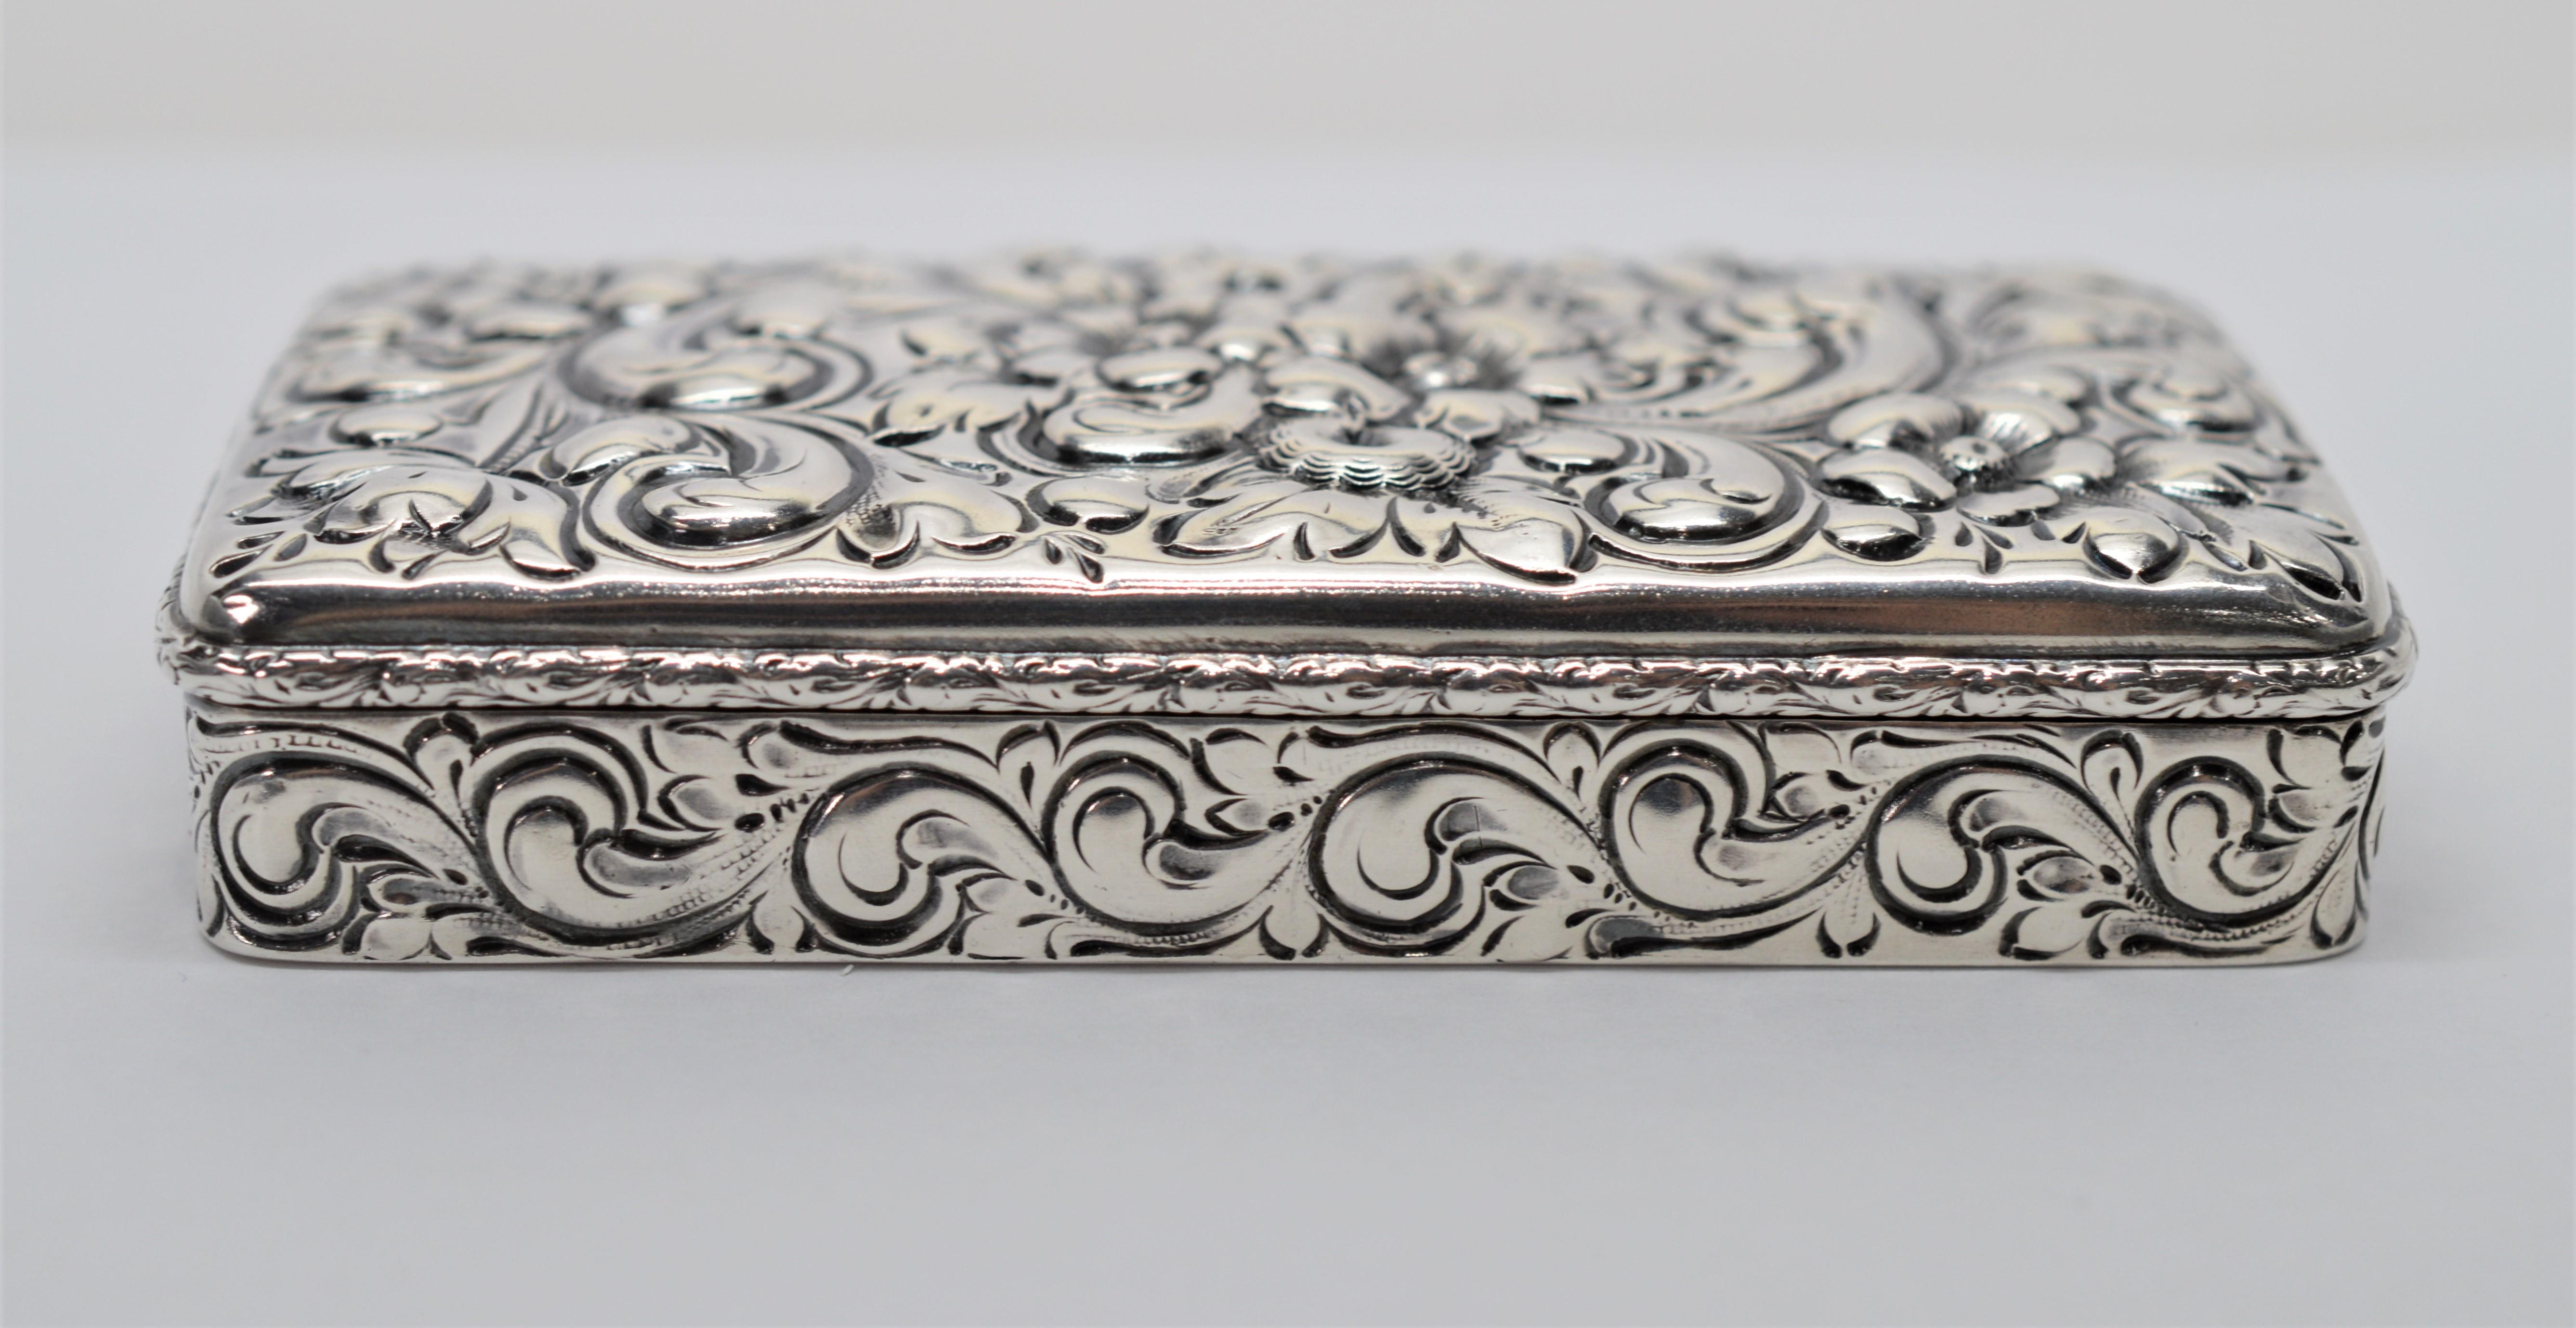 Fine Sterling Silver with American hallmarks, this antique snuff or tobacco box is beautifully created in the Nouveau style. The box measures 4 inches long x 2 inches wide and 7/8 inch deep. The hinged runs the full length of the box and with snap